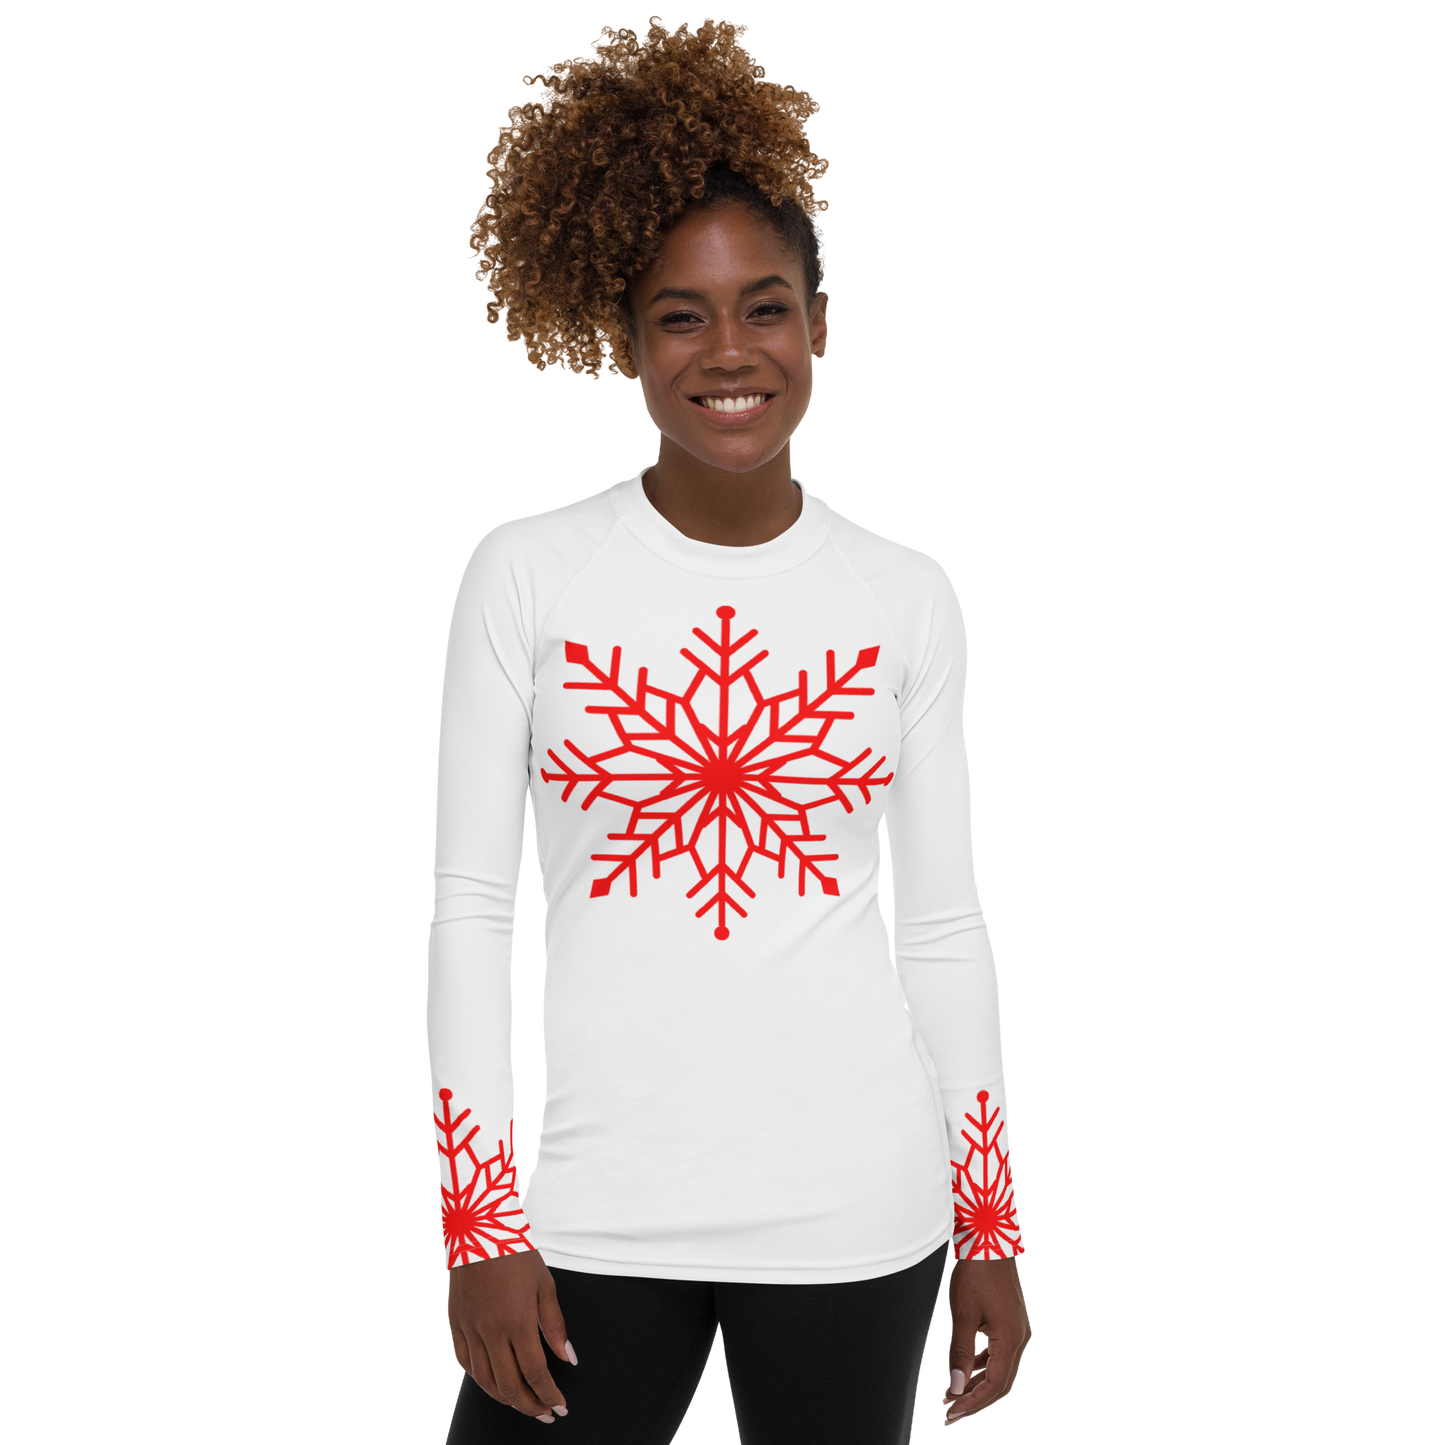 Winter Snowflake Top, Bright Red Snowflake on White Women's Rash Guard, Holiday Top